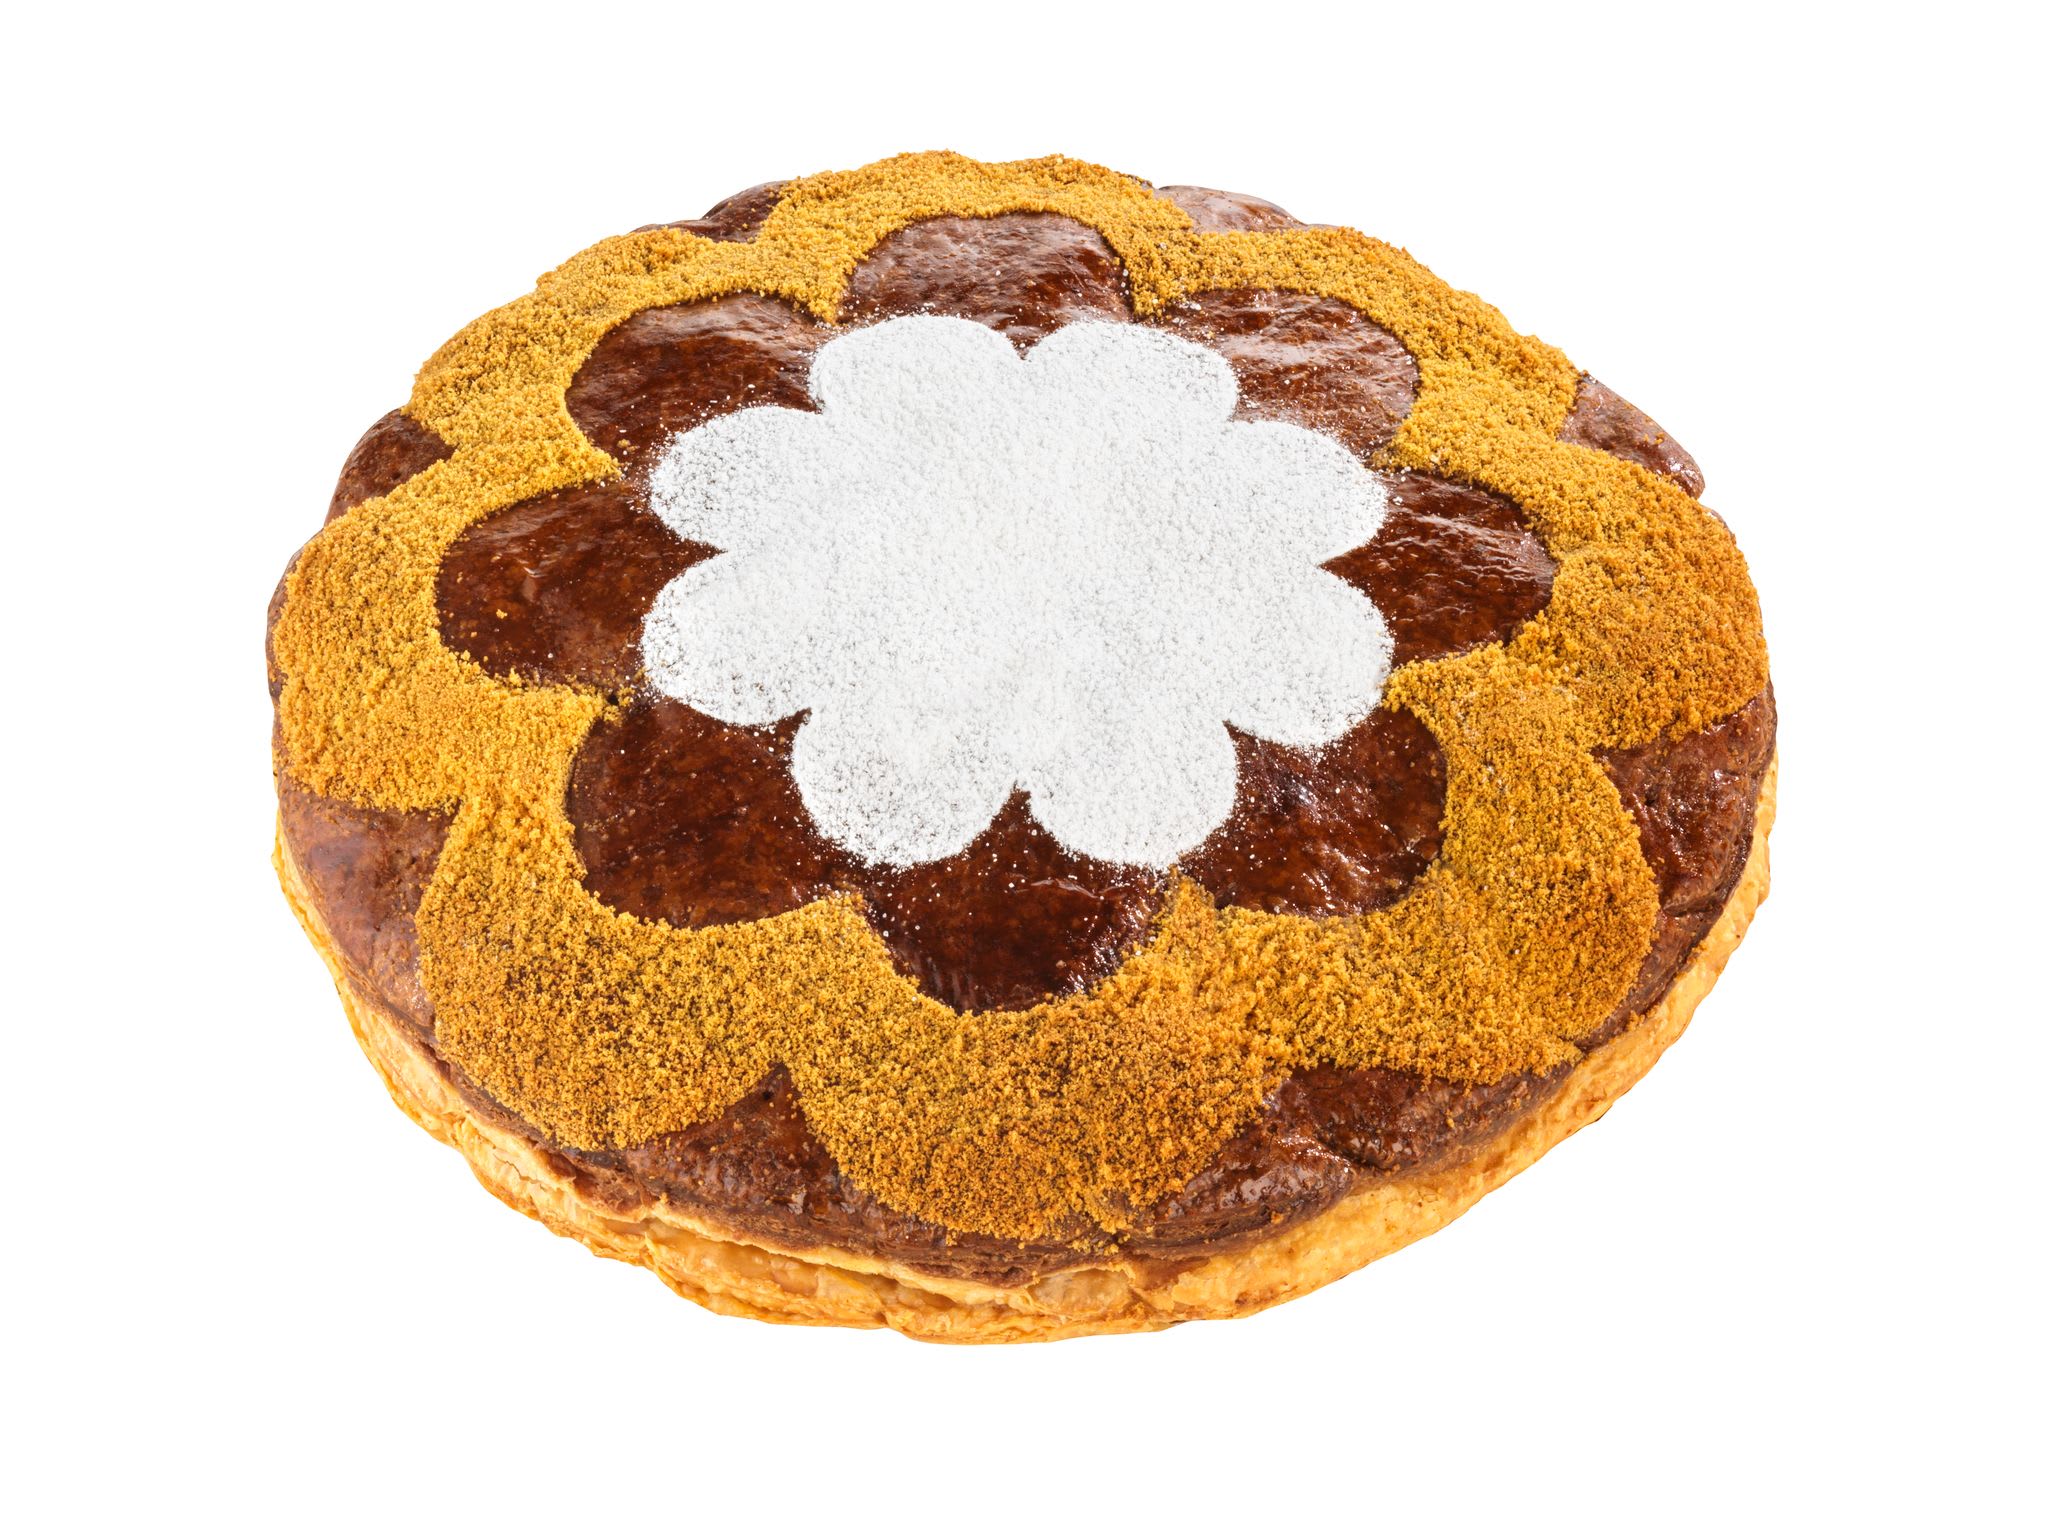 Epiphany: the most beautiful king's cakes in the Paris Region